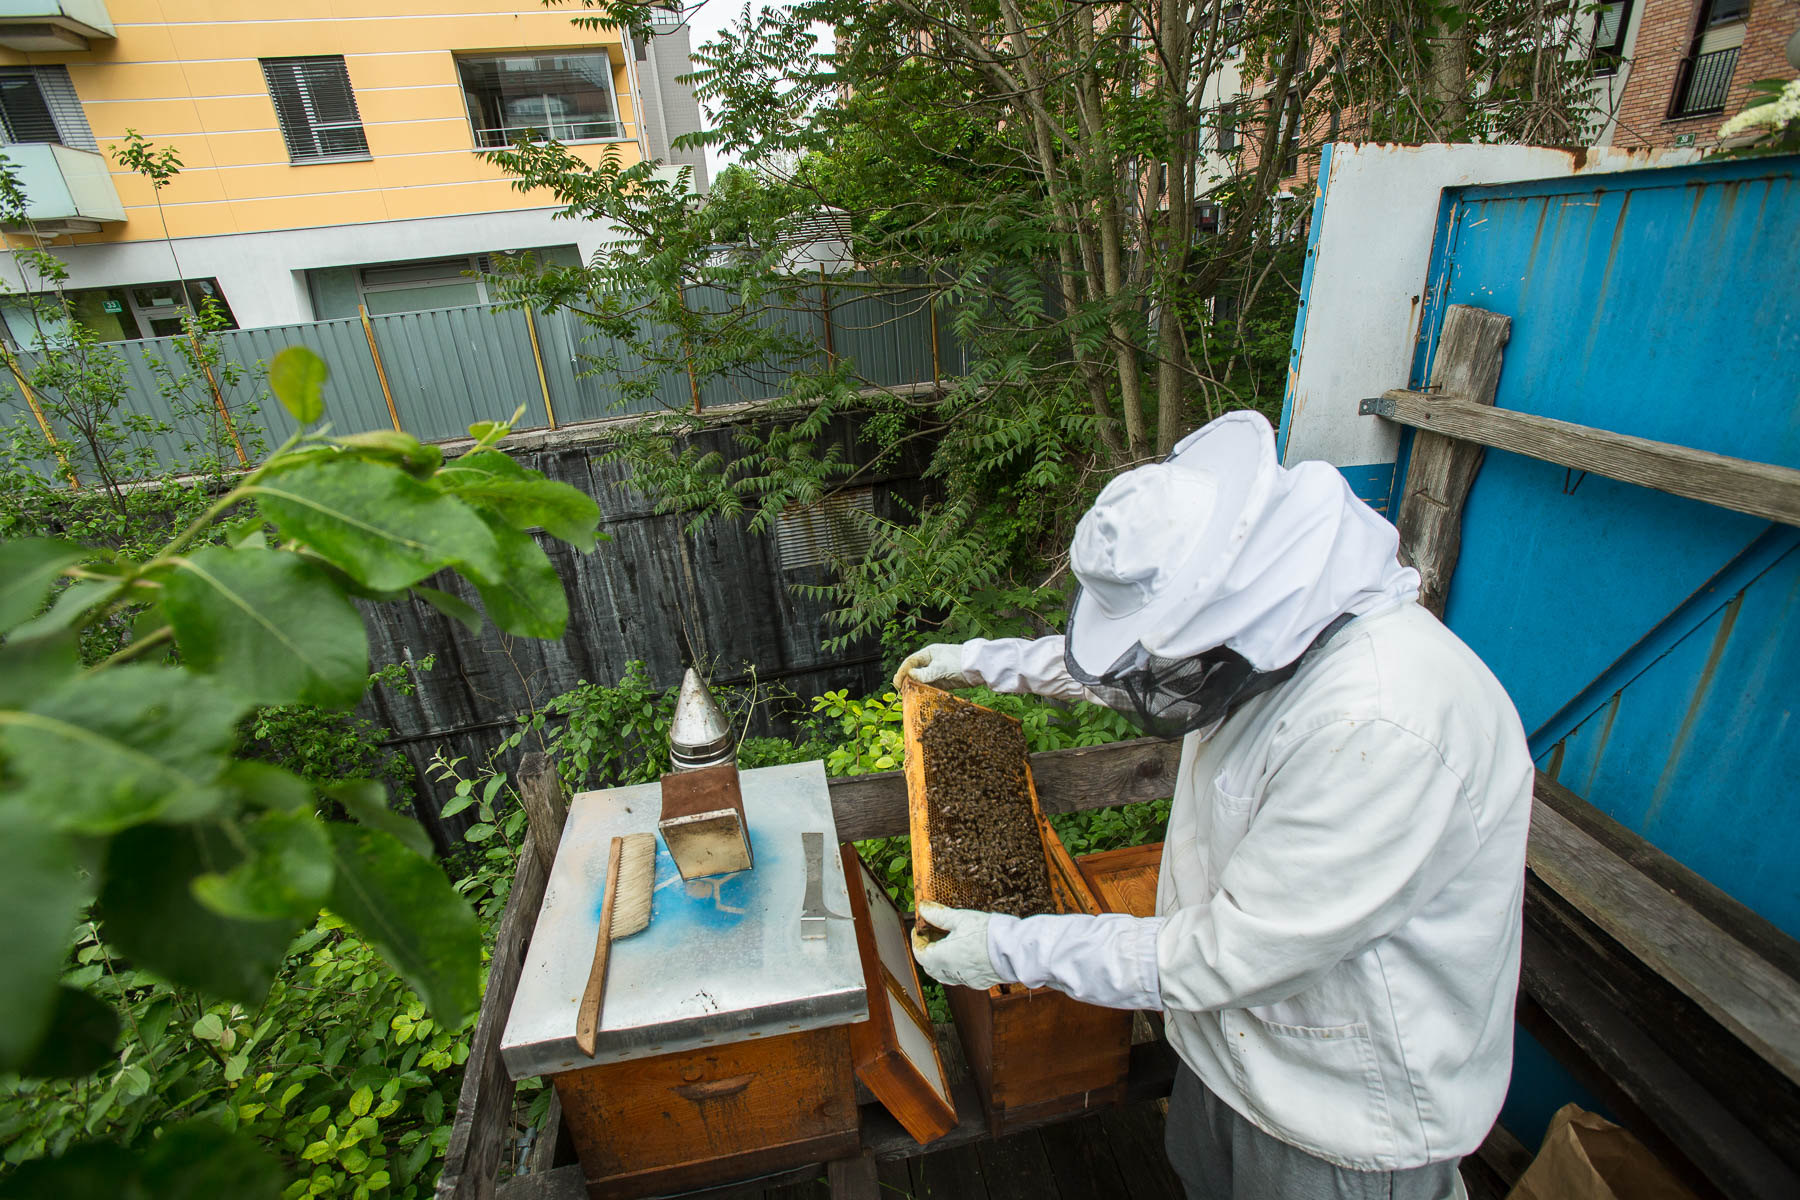 Trušnovec inspects the beehives at a deserted construction pit transformed into an urban community garden called Onkraj gradbišča (Beyond a construction site) in Ljubljana.